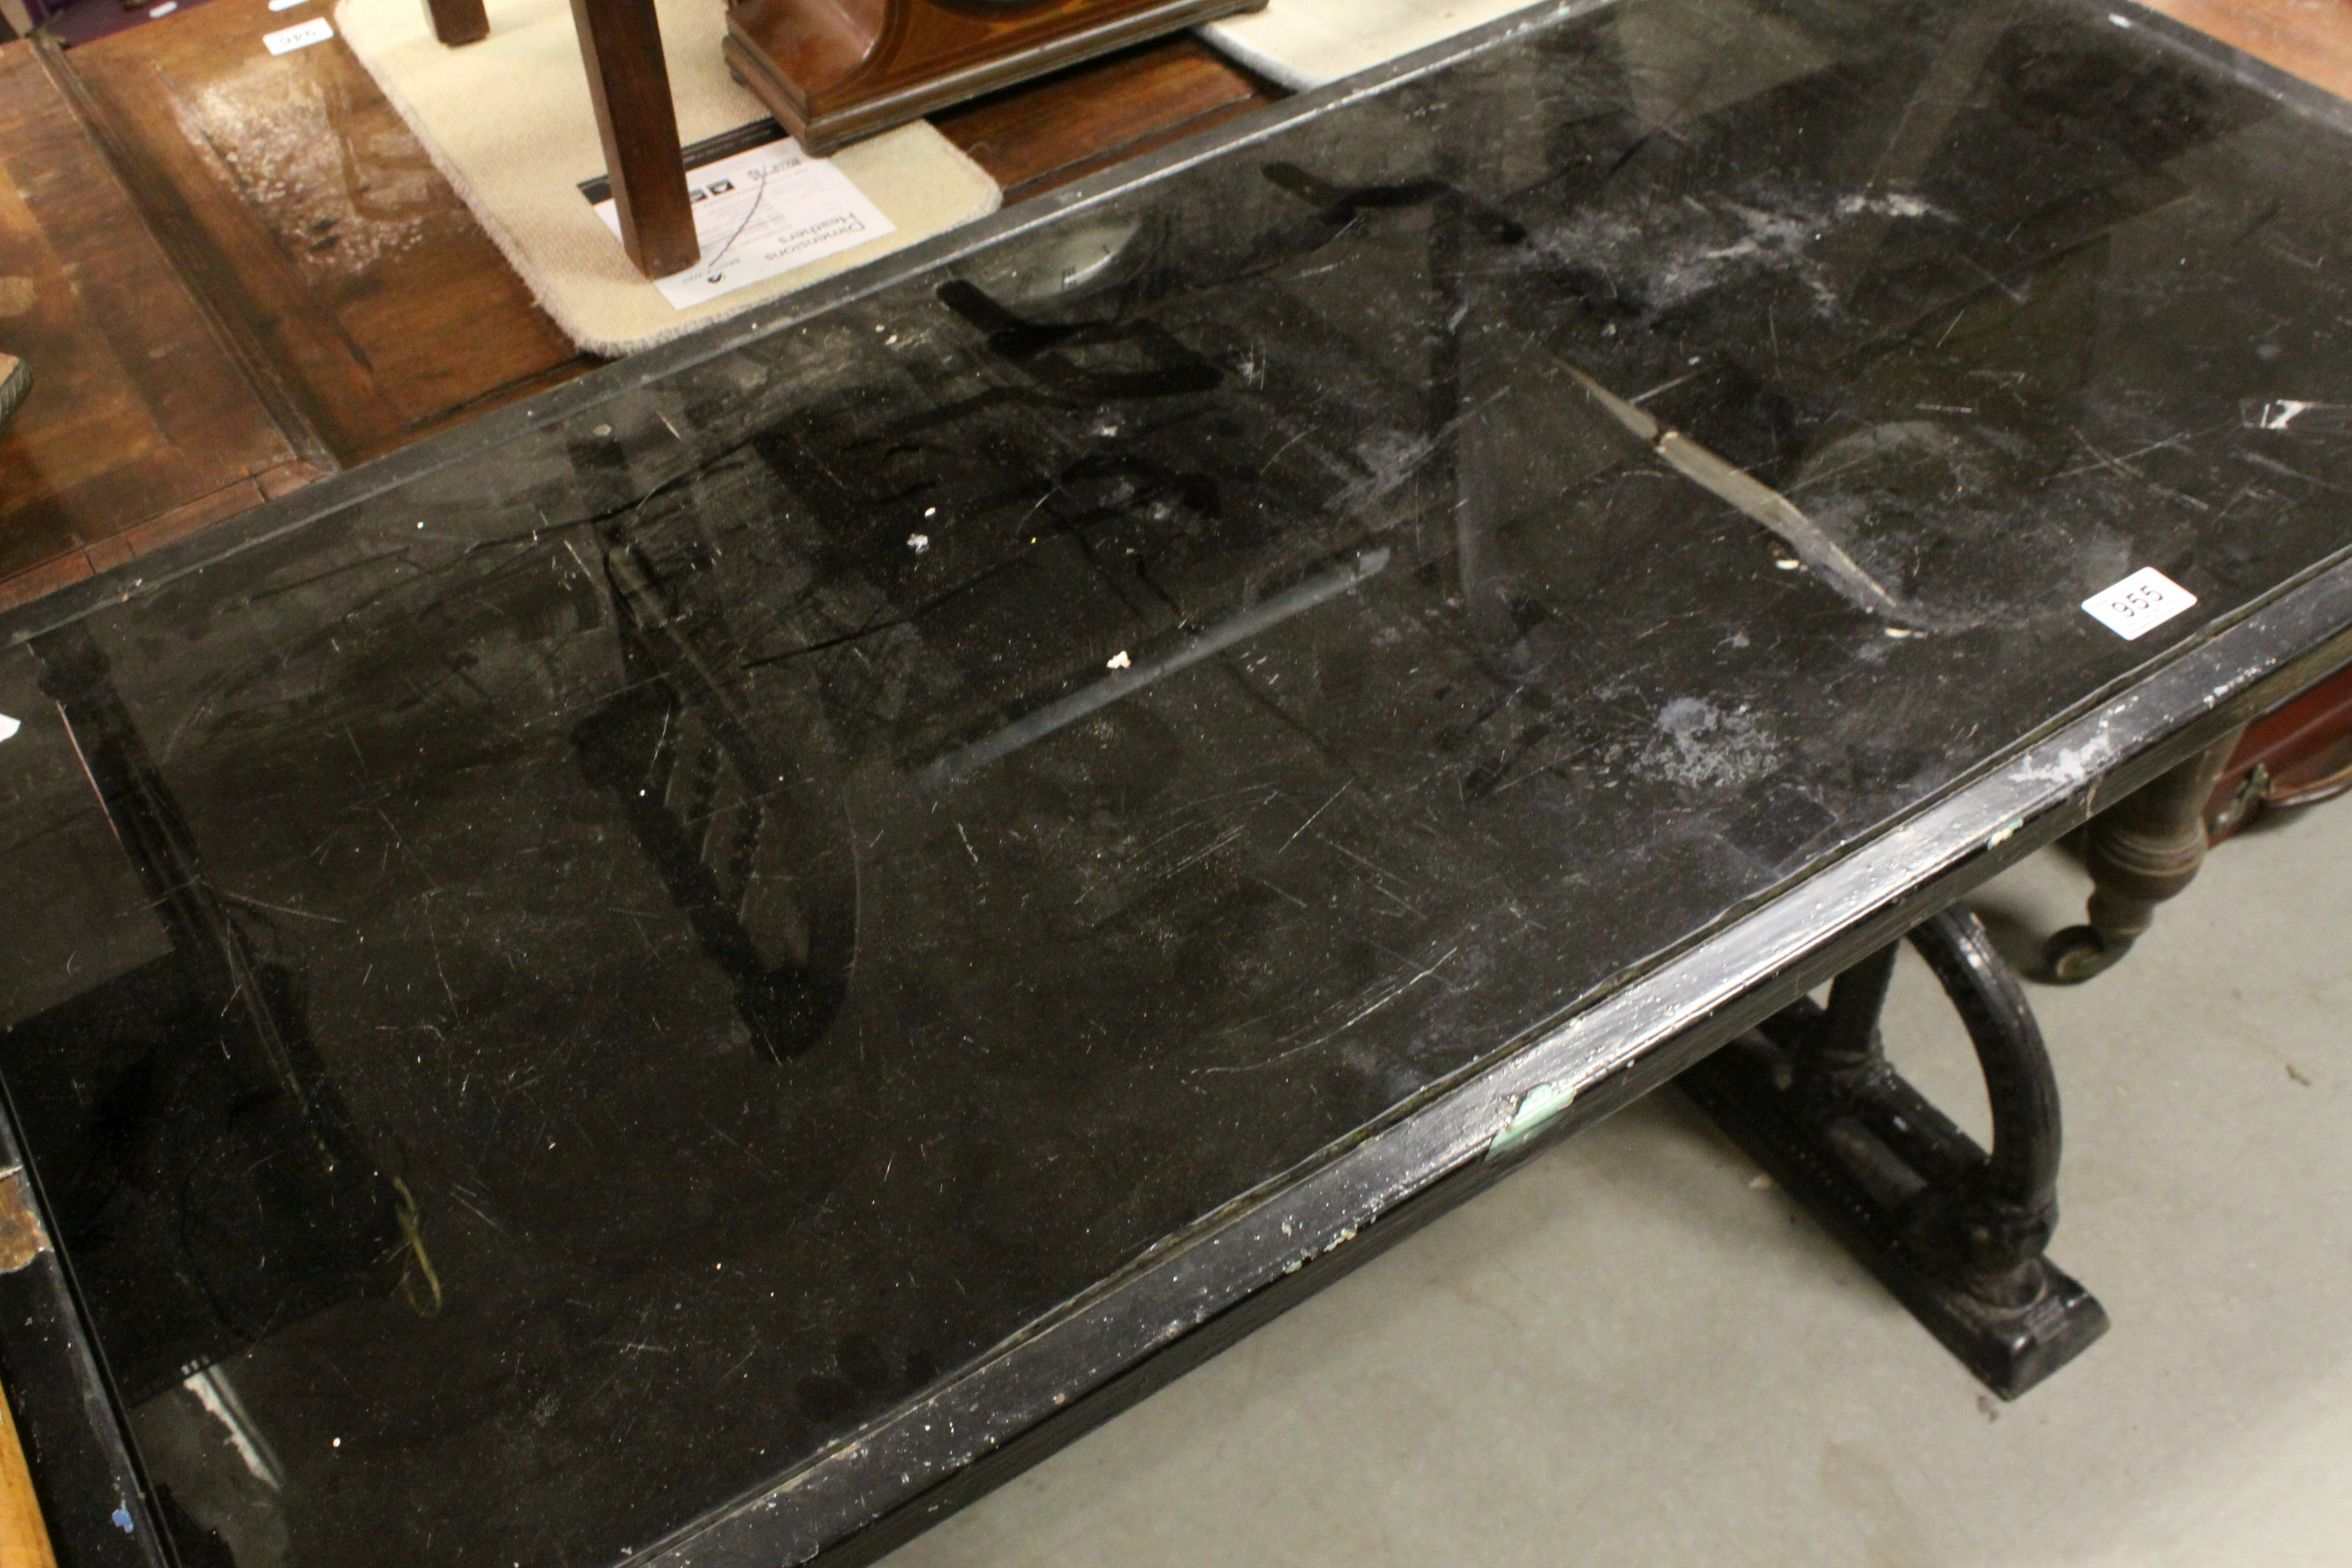 Coalbrookdale Style Garden / Pub Table with Black Glass Inset Top, 117cms x 58cms x 78cms high - Image 8 of 10